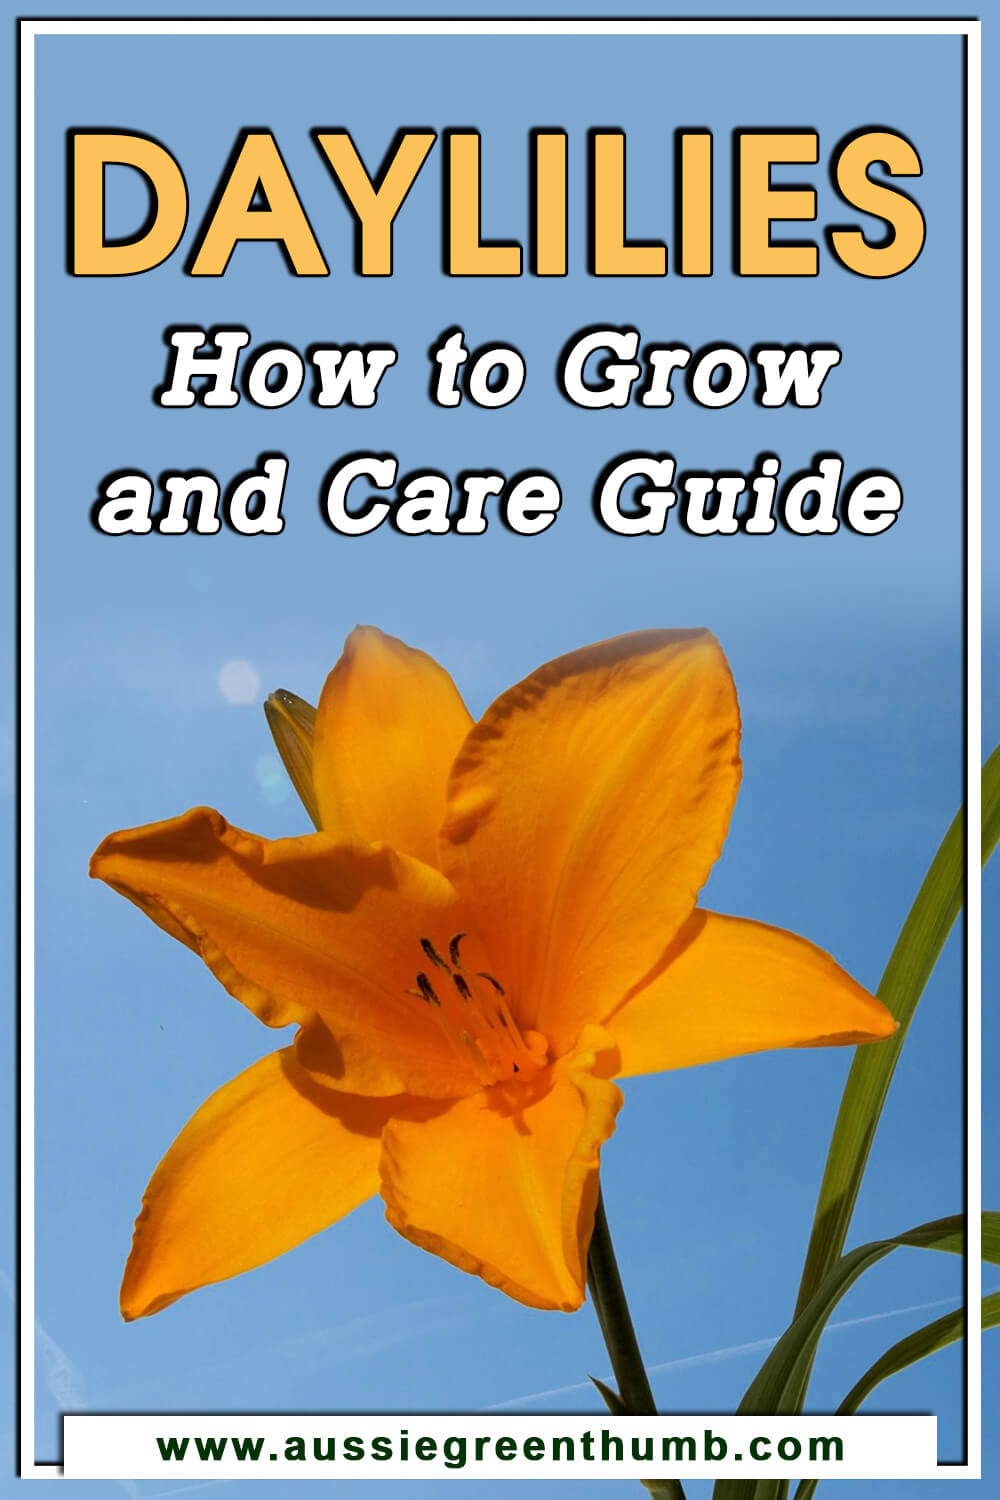 Daylilies How to Grow and Care Guide